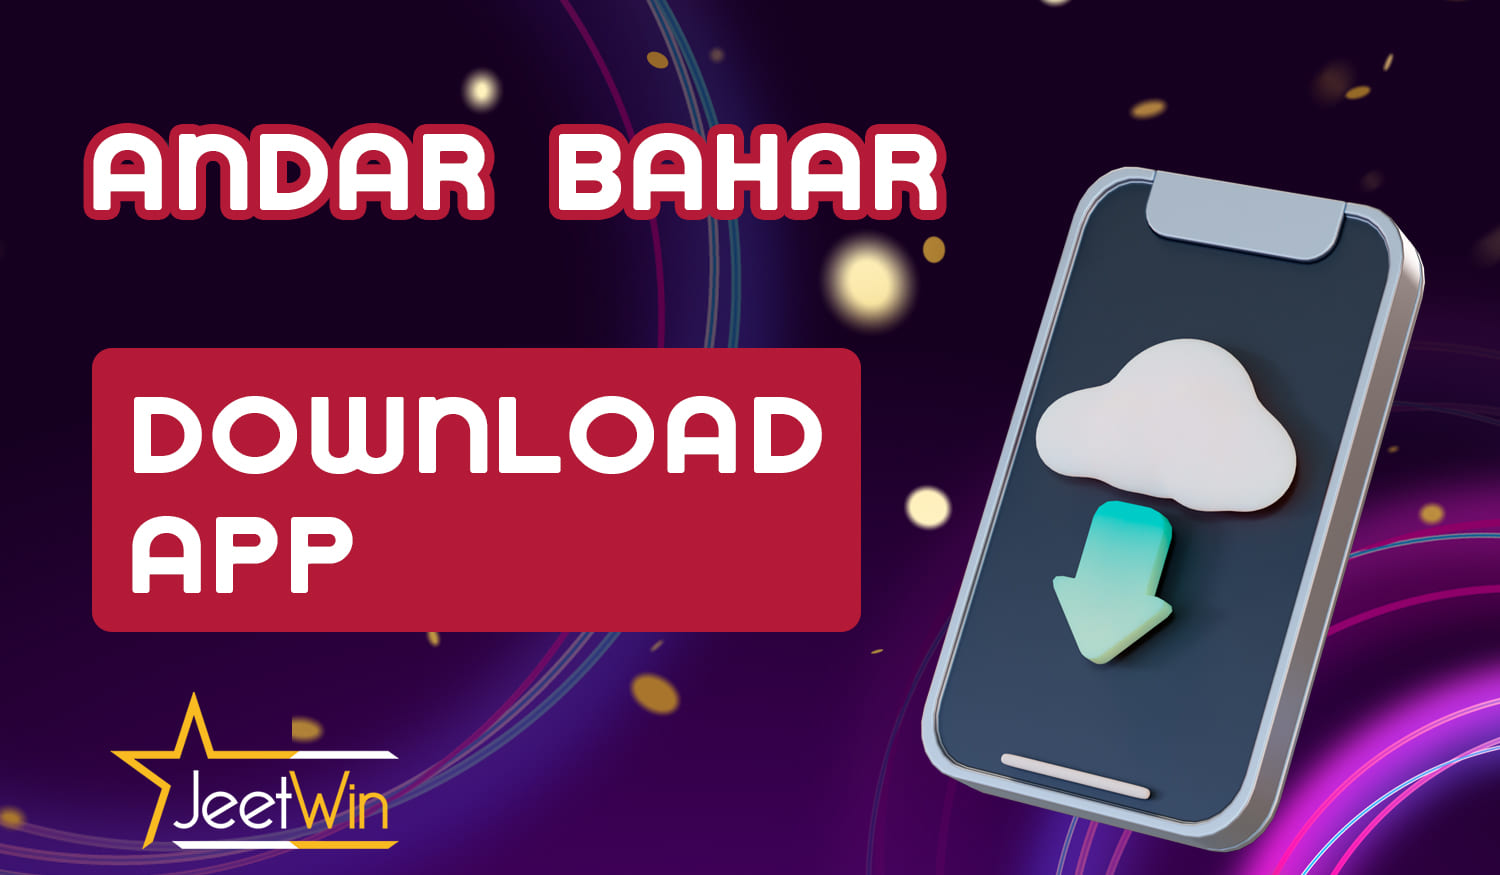 How to download and install the Jetwin app and start playing Andar Bahar